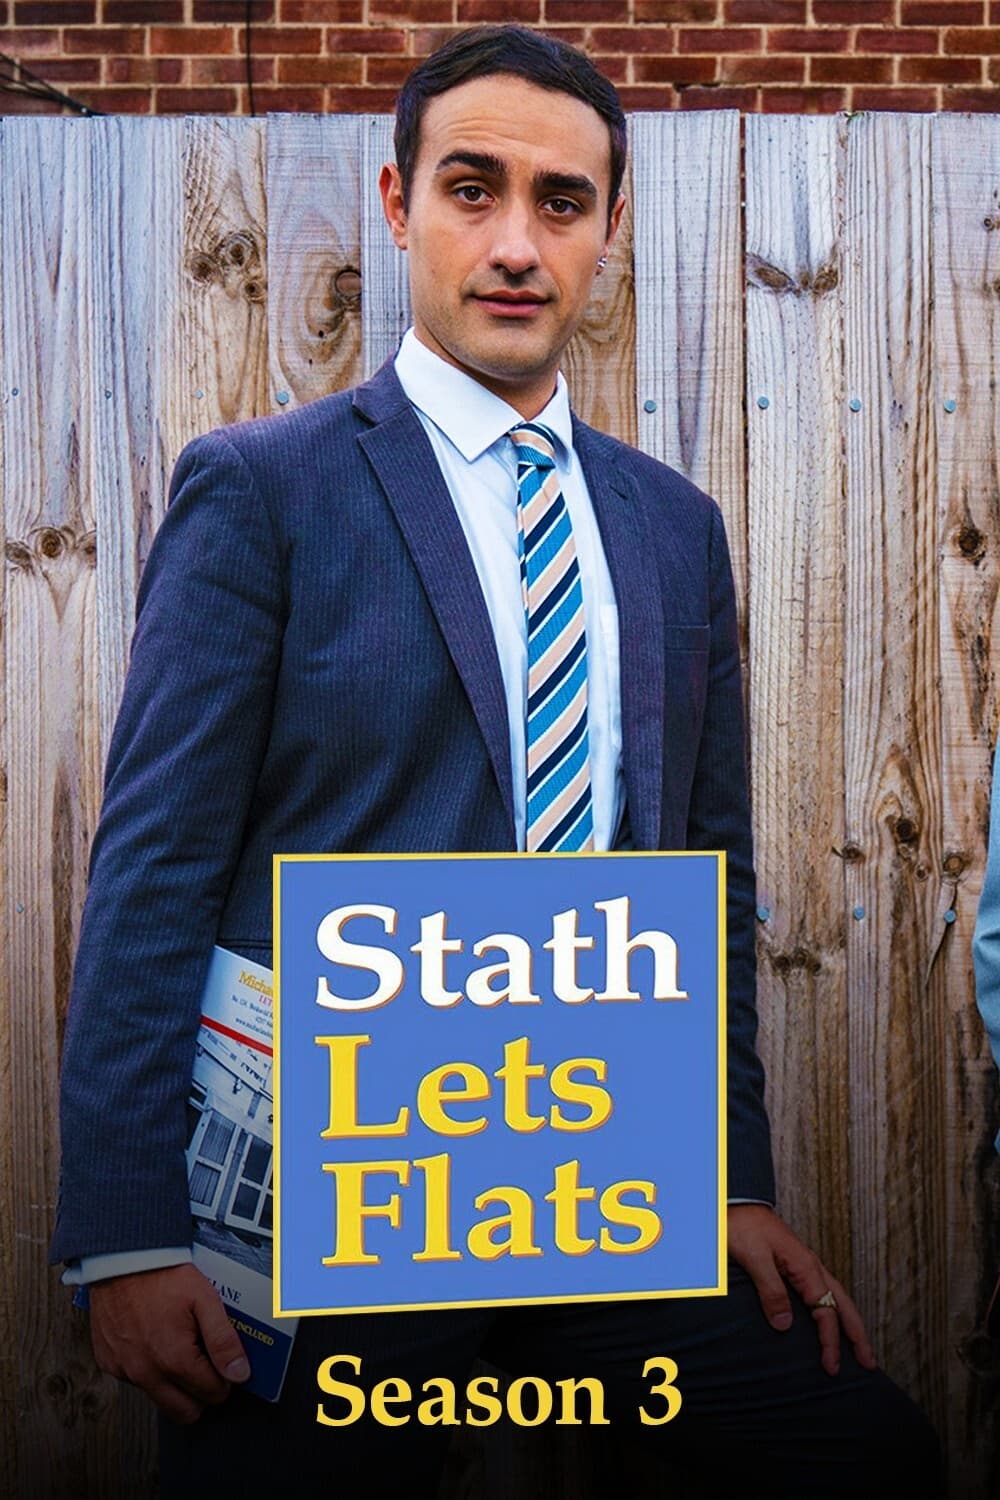 stath lets flats actor